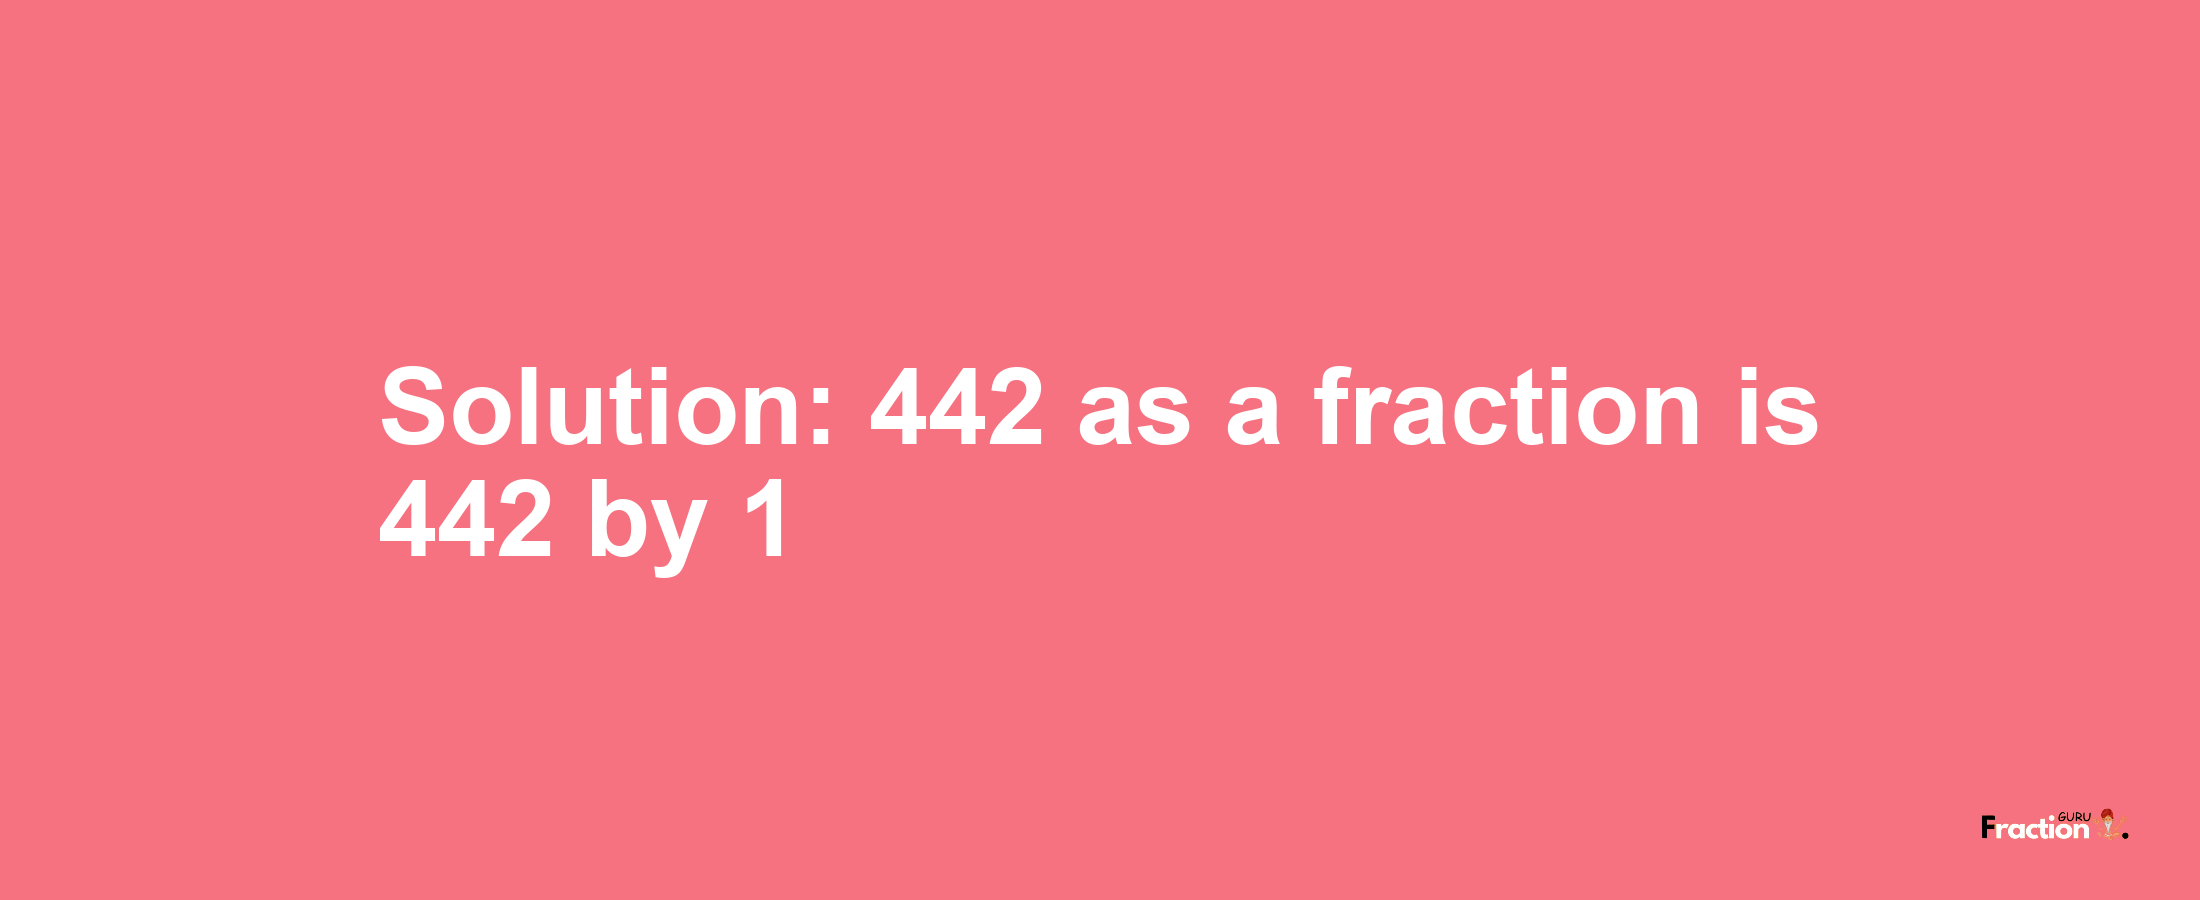 Solution:442 as a fraction is 442/1